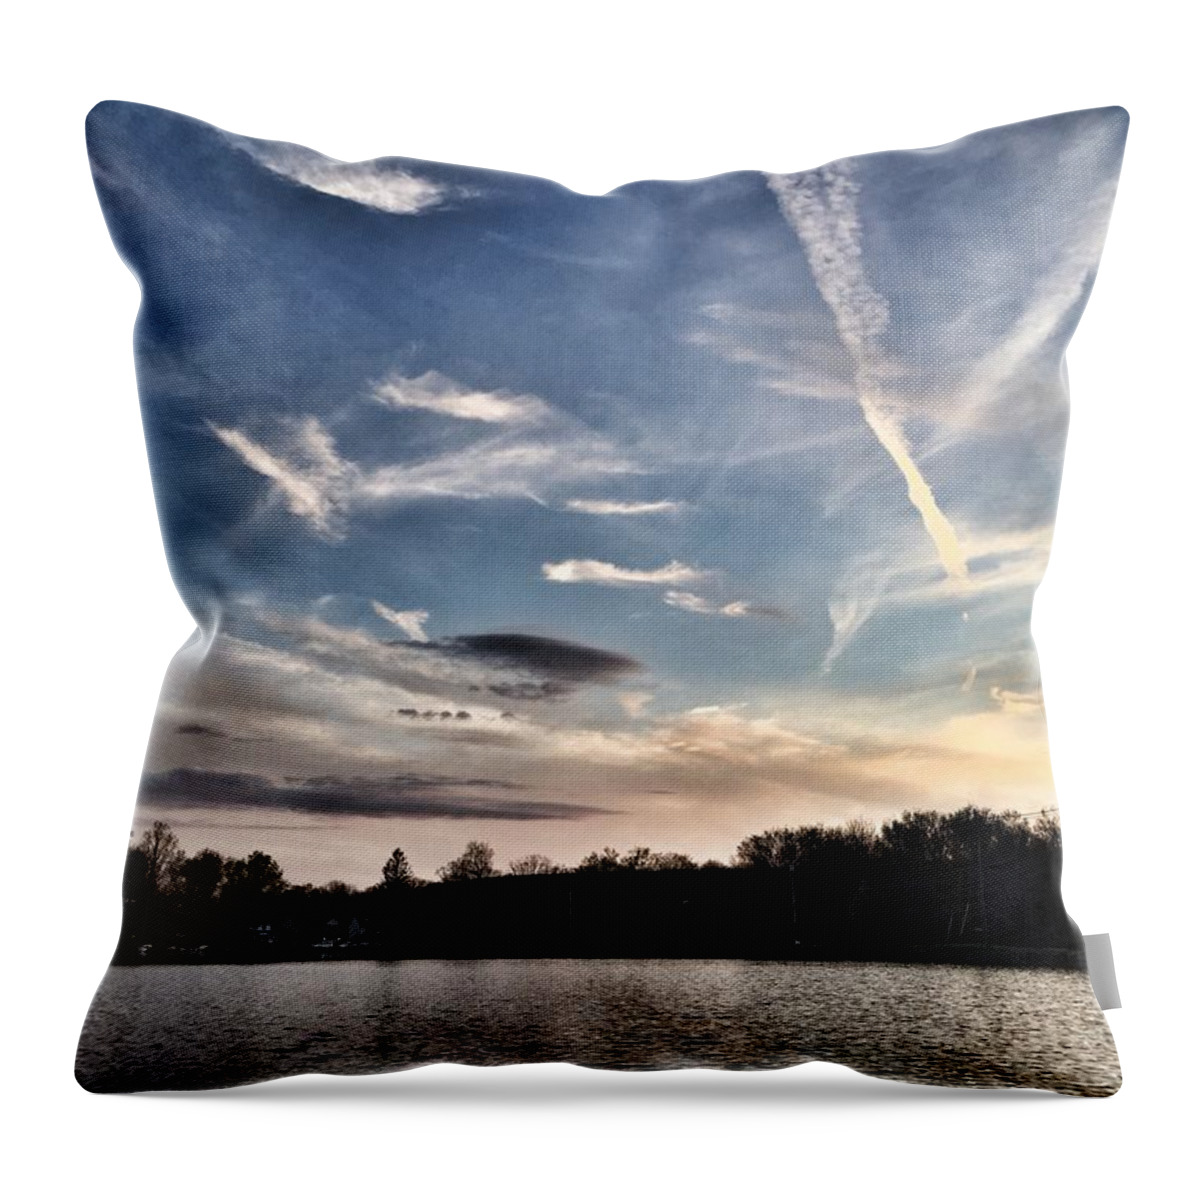 Clouds Throw Pillow featuring the photograph Sky Drama by Jason Nicholas